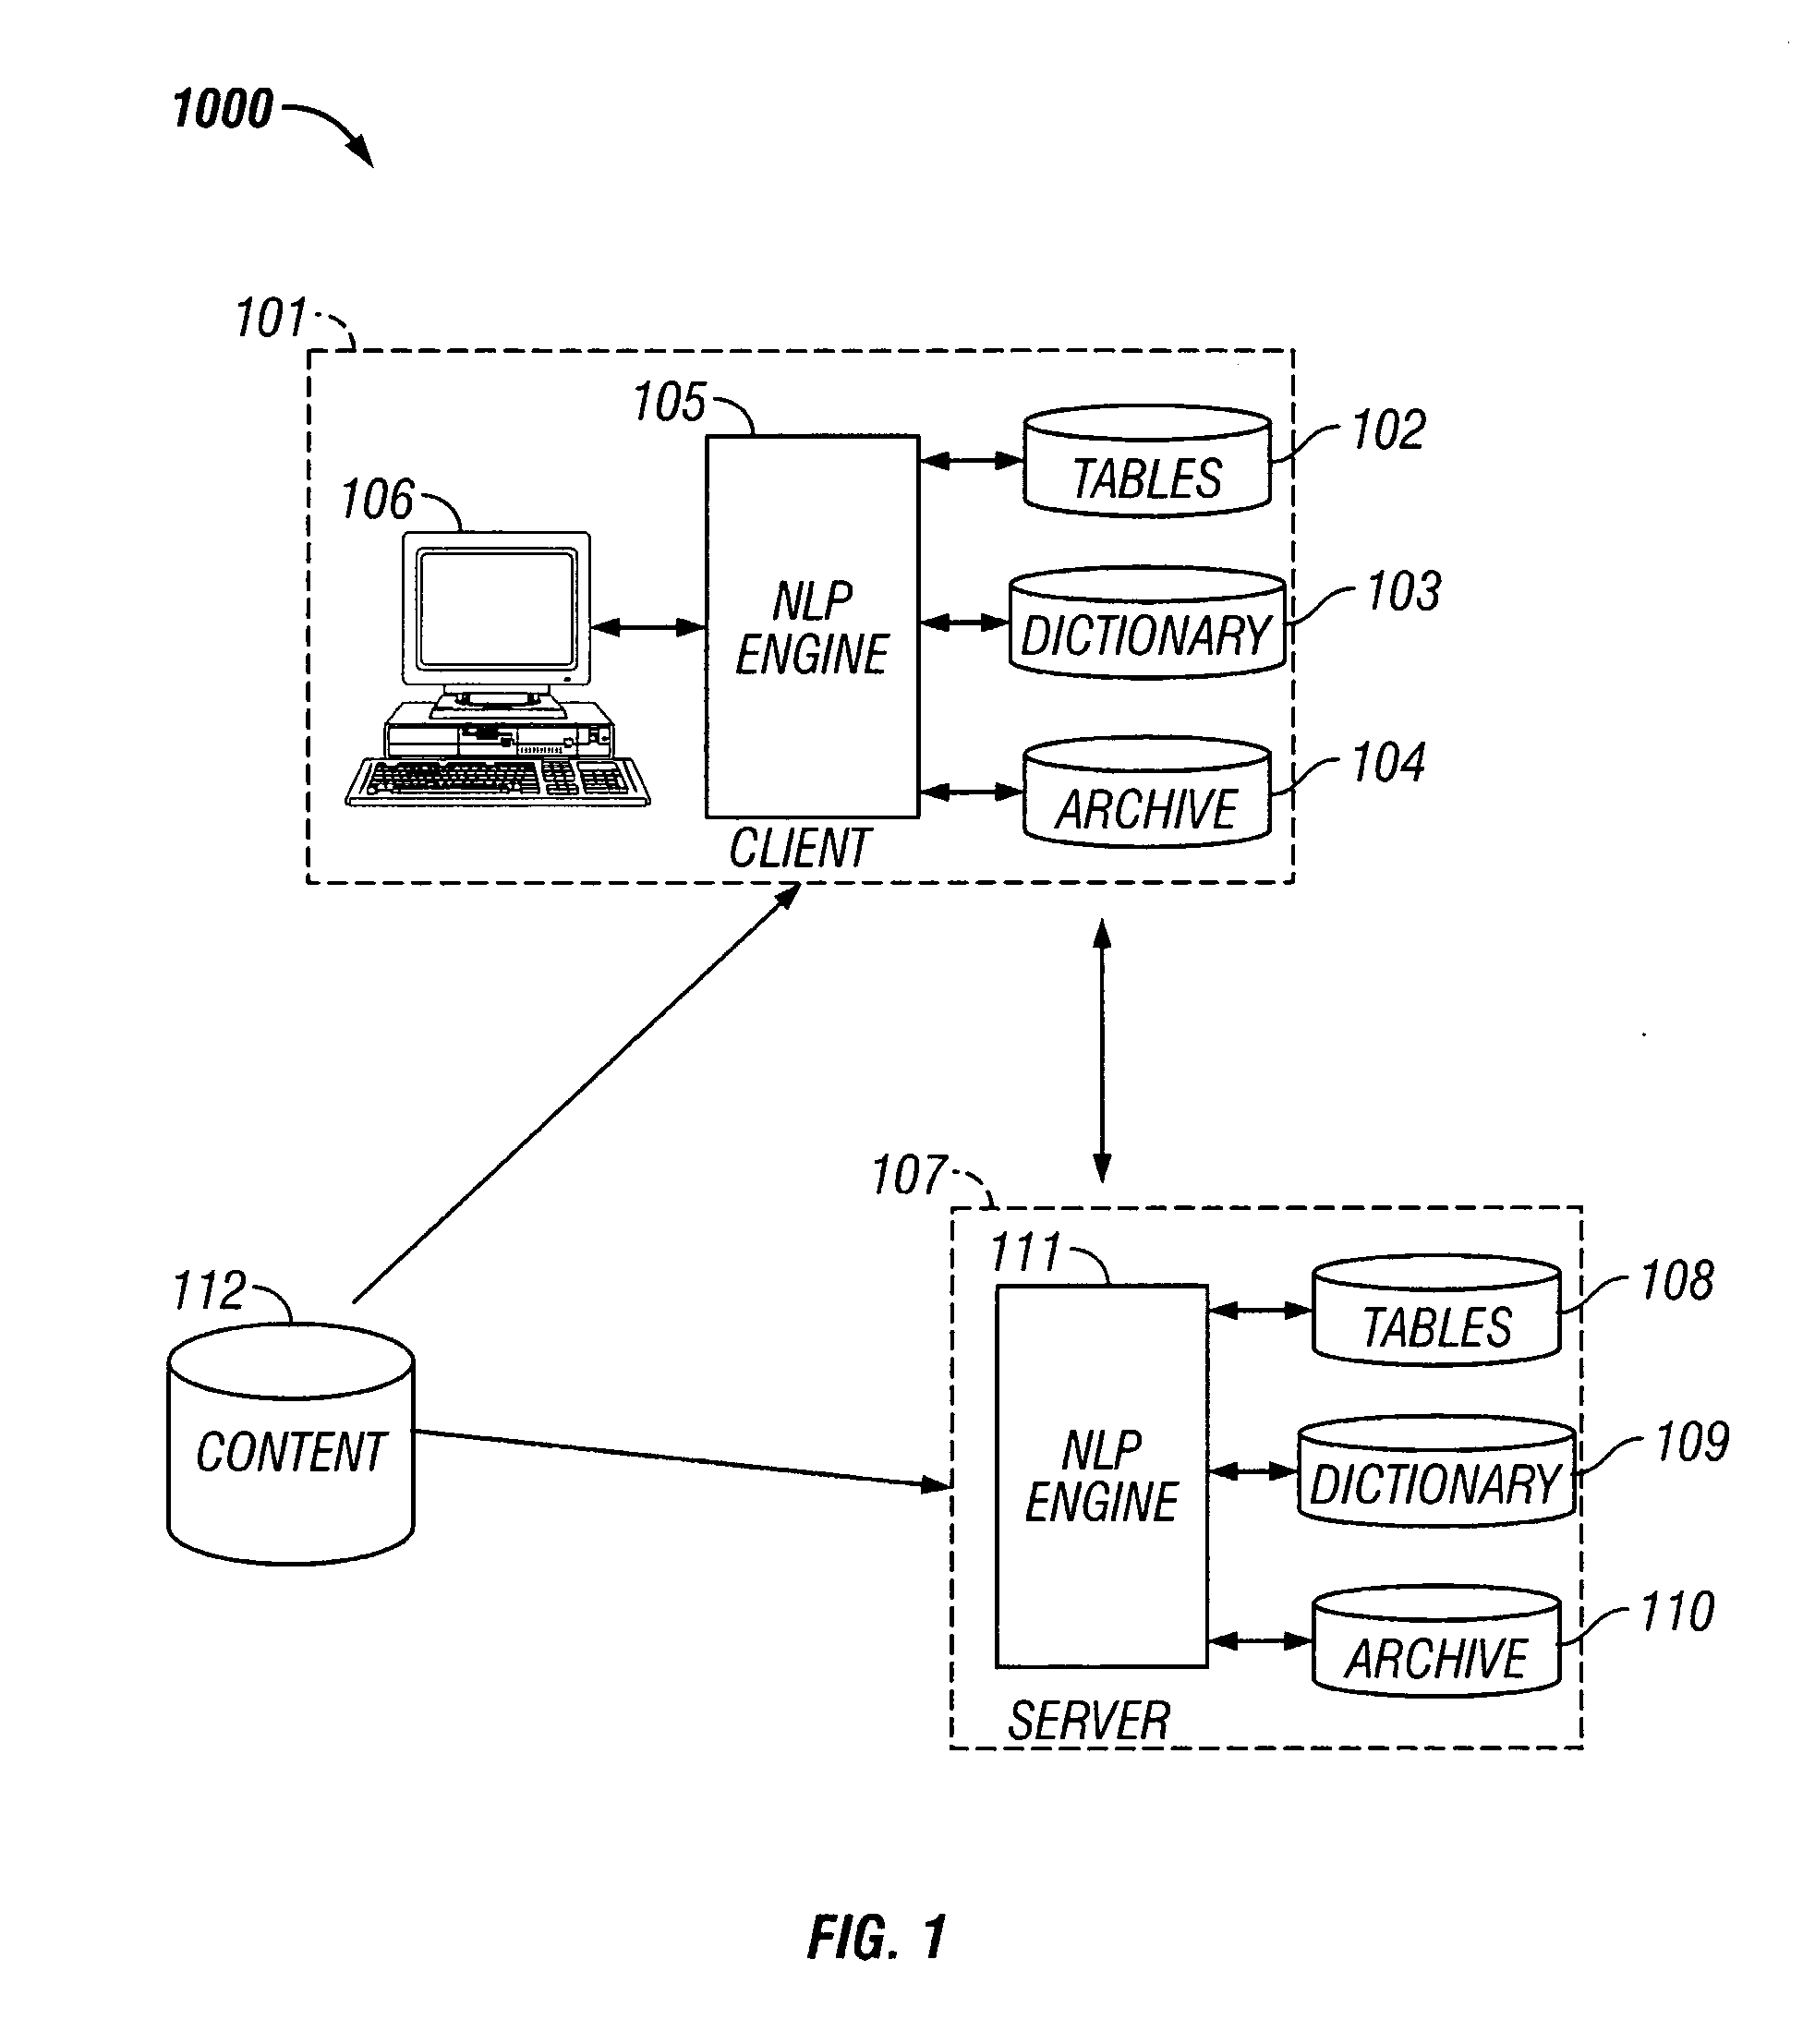 Apparatus and method for organizing and presenting content